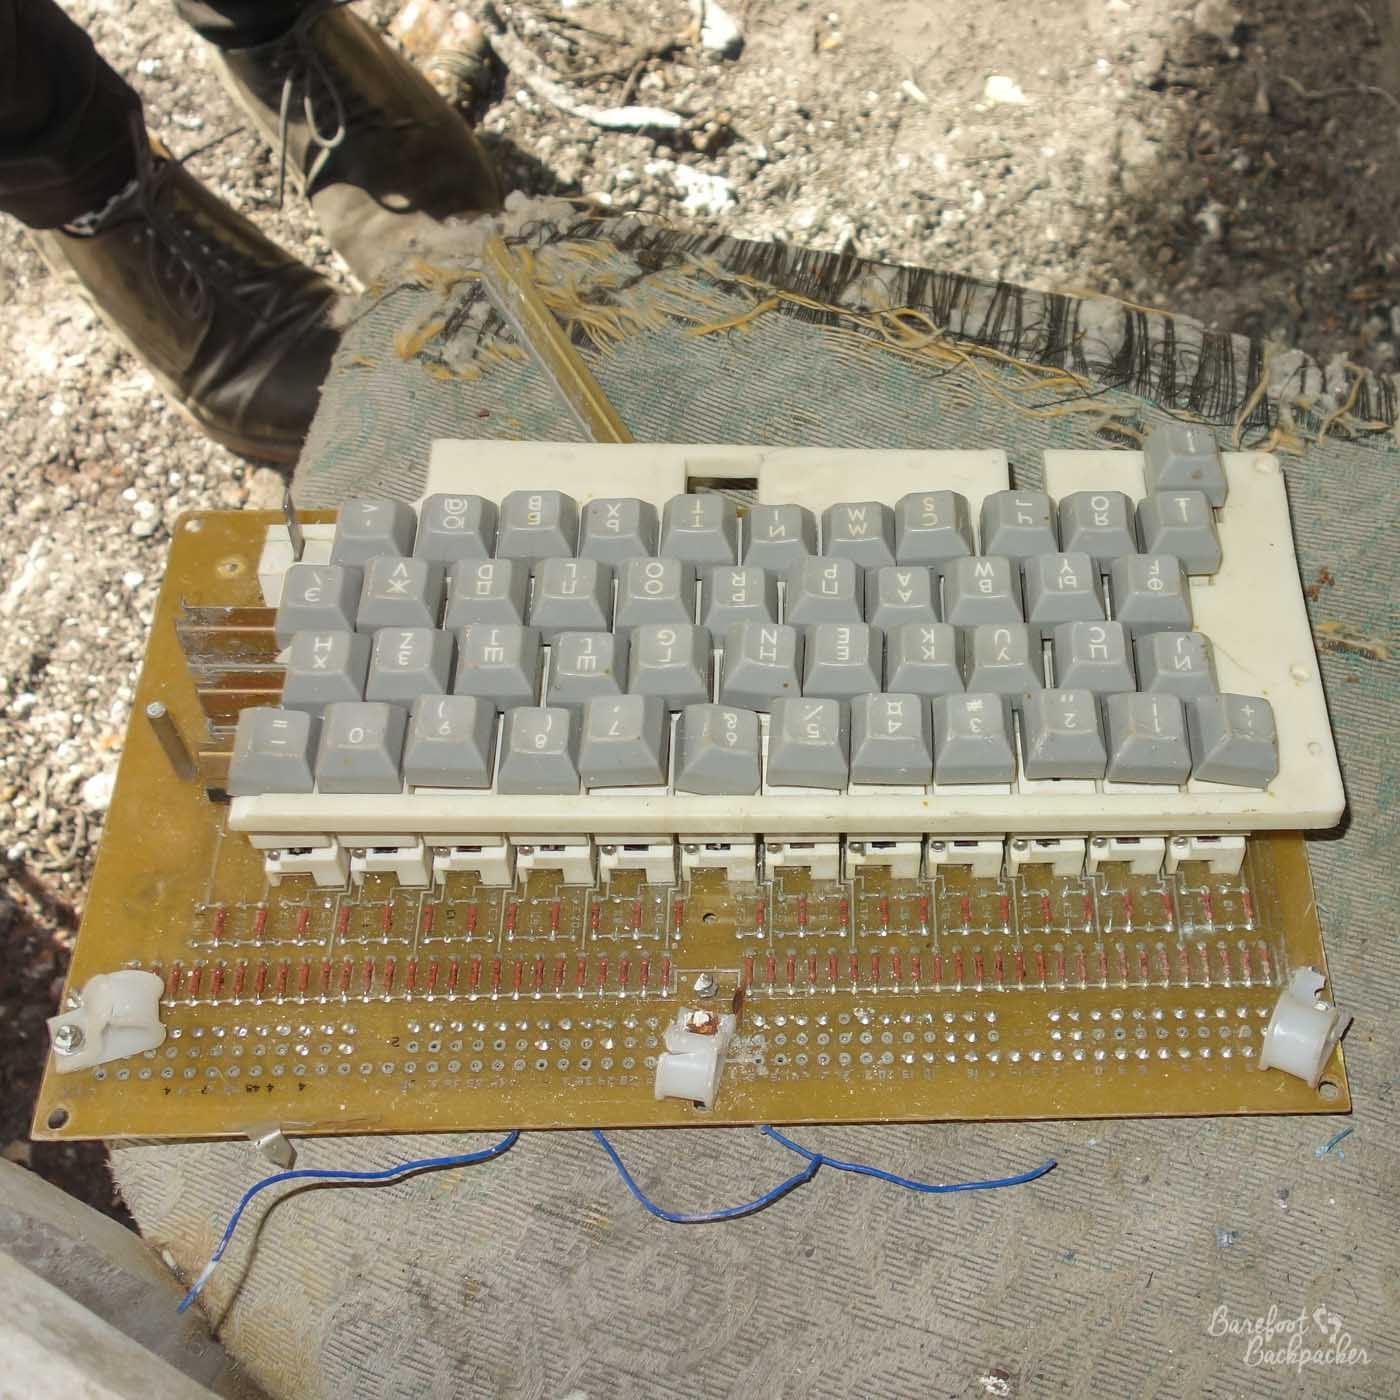 A broken computer keyboard with cyrillic keys lies on the floor of the complex, electronics smashed.